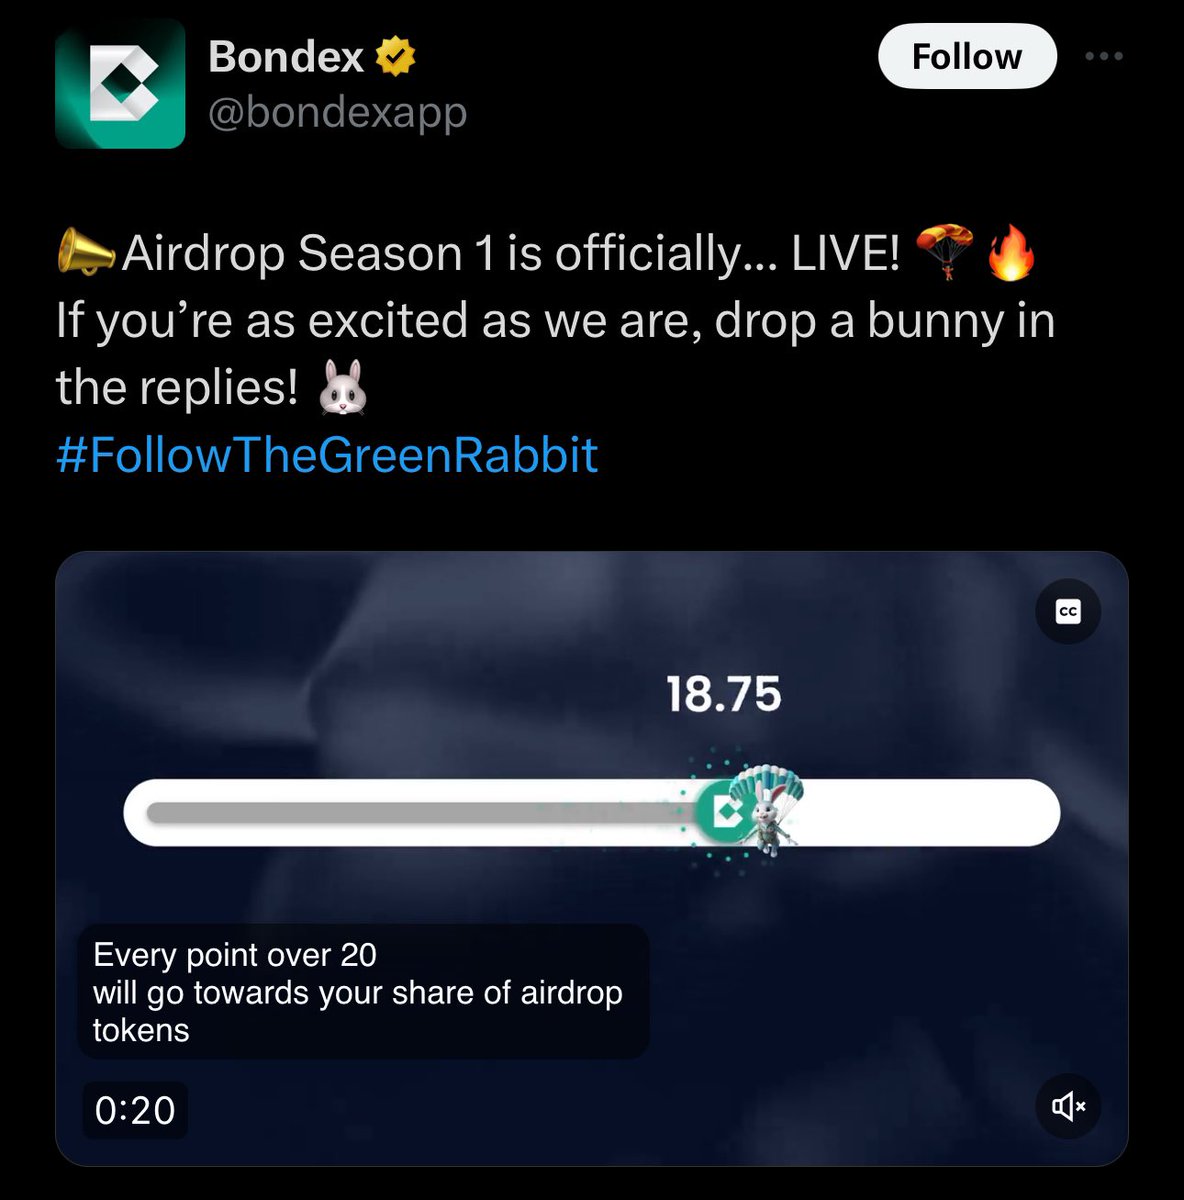 Bondex Airdrop is officially live 🔥

- Install the app from bondex.page.link/JMJPRNA4HXKSGv…

- Make sure to complete your profile,
Have a valid resume and Connect your wallet.

If you had the app earlier, do well to update it and gather as many points as possible.

- Copy your ref link…